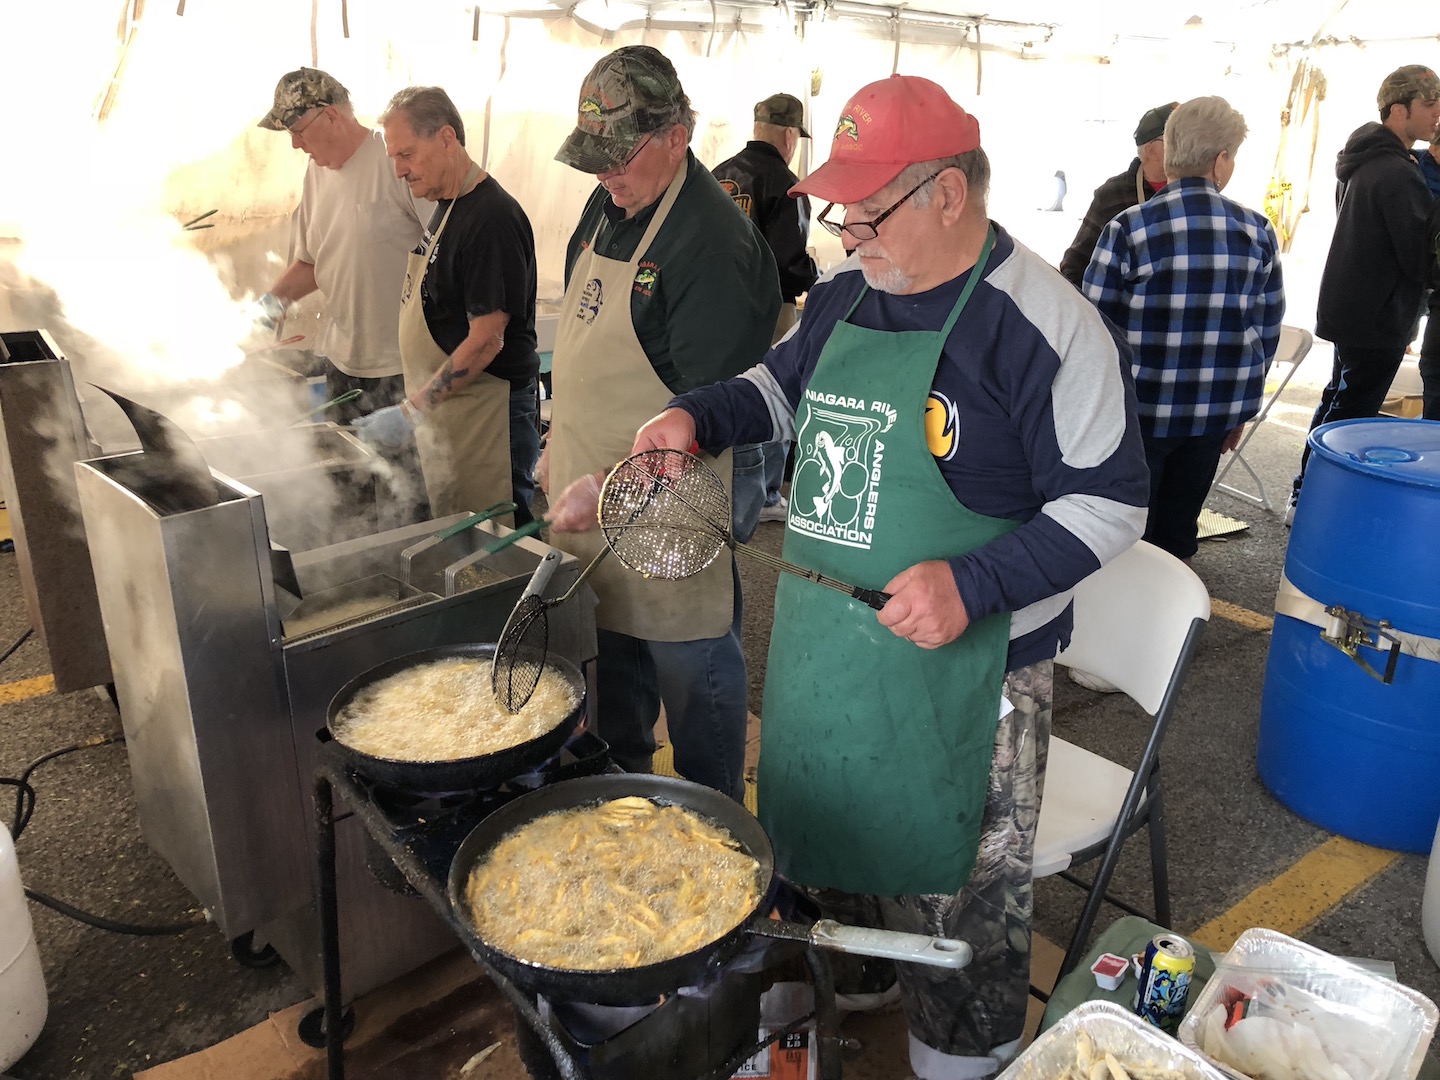 The Smelt Festival brings visitors to Lewiston, but also serves as a fundraiser for the Niagara River Anglers -- some of whom are shown cooking the fish. (File photo)